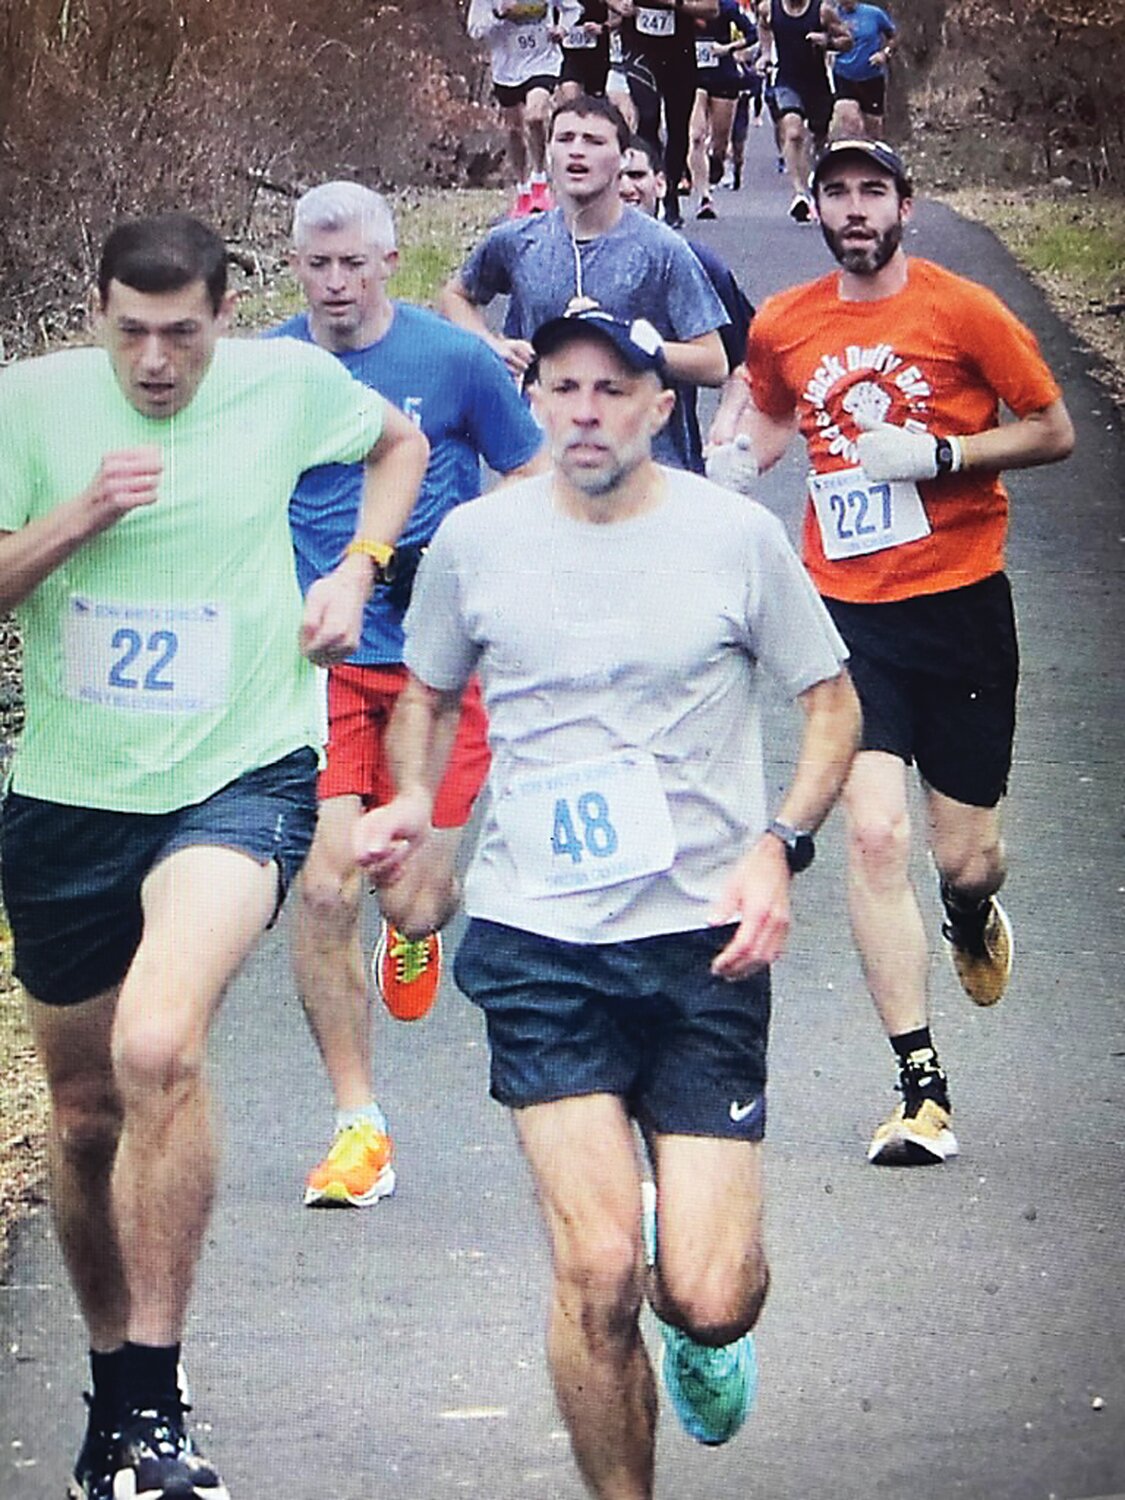 Chris Carabello (No. 48) finished sixth overall in Sunday’s Covered Bridge 5K at Tyler State Park.